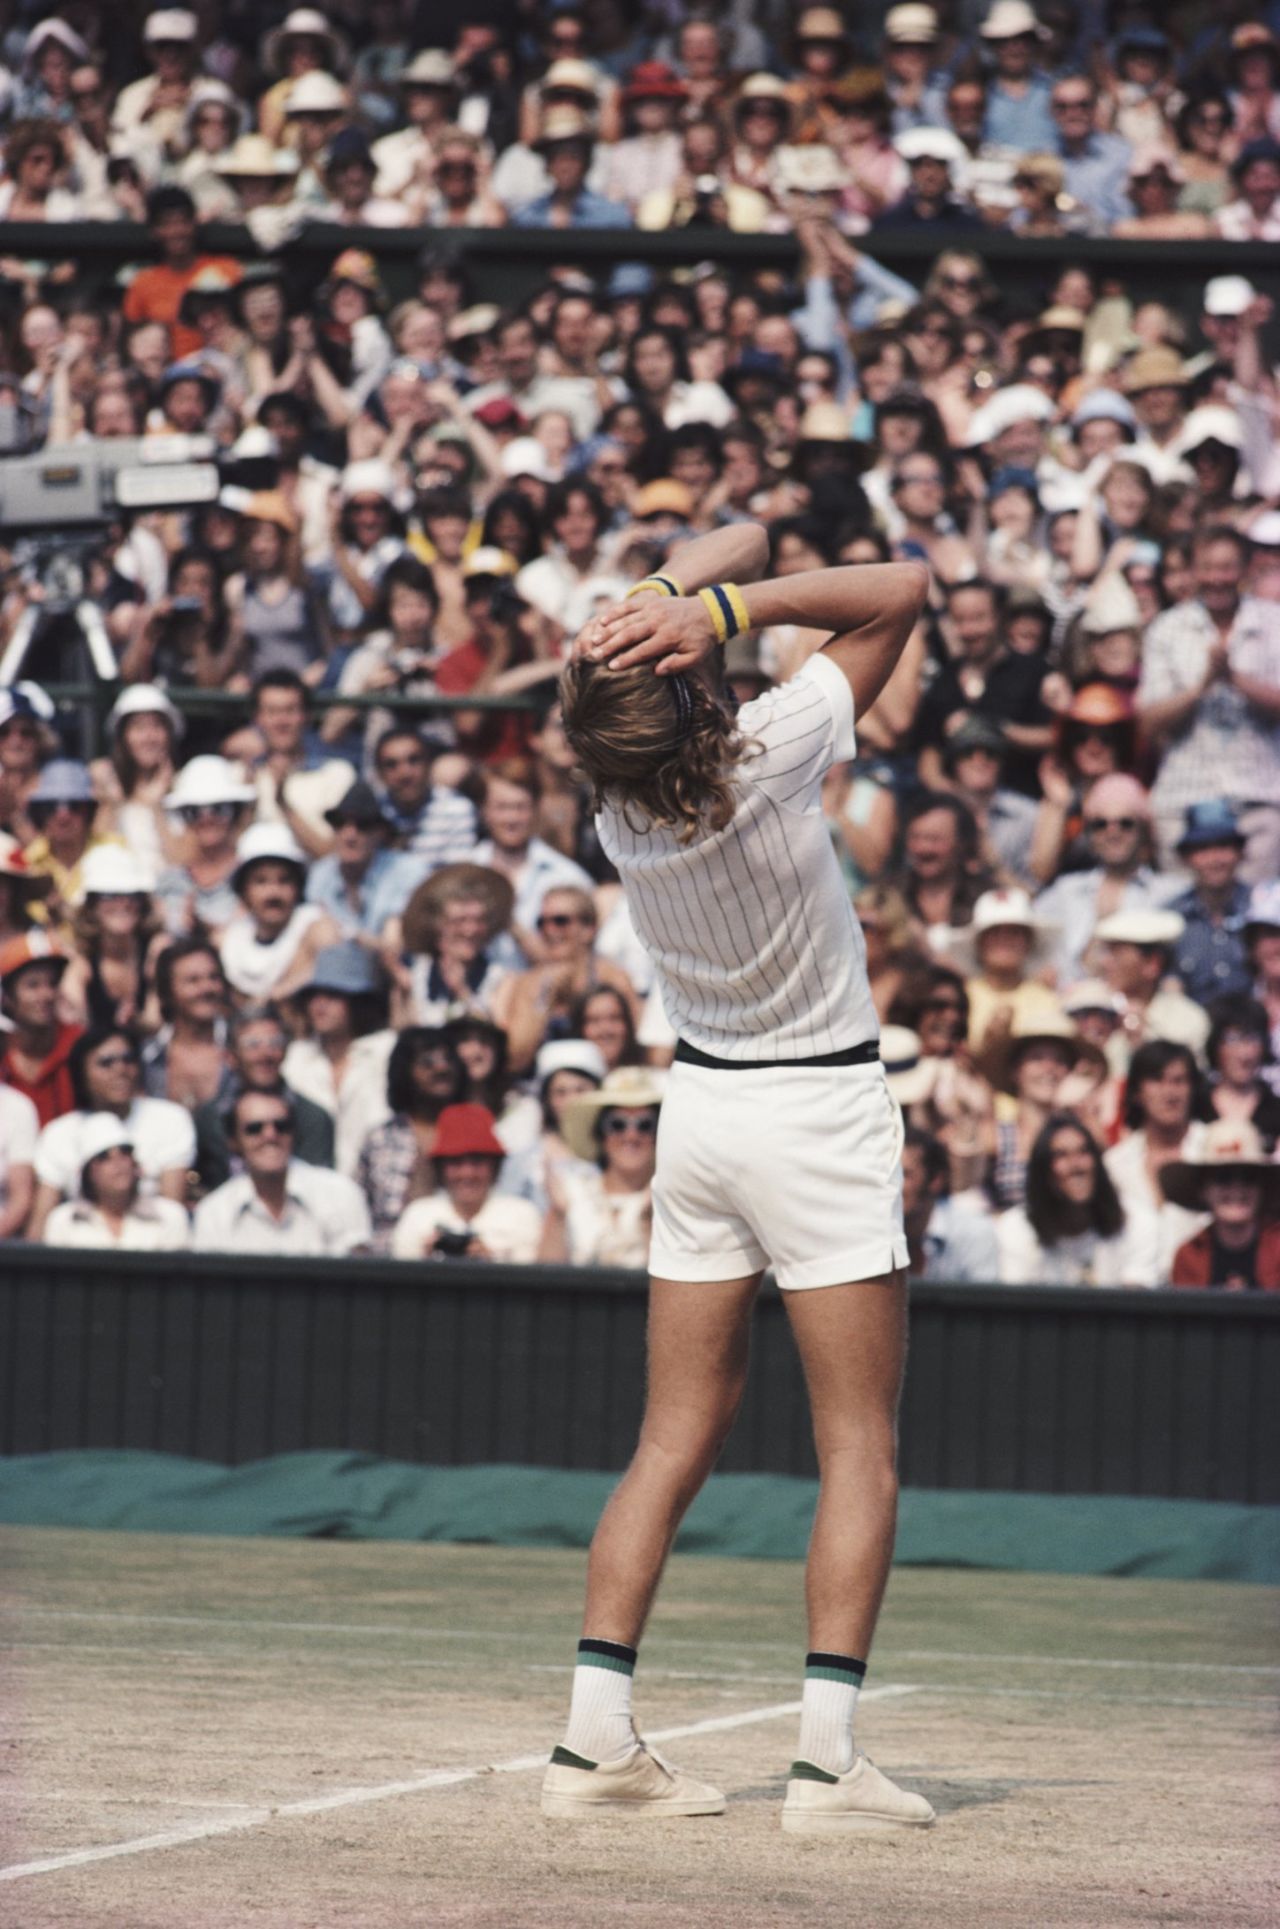 But he soon conquered his difficulties -- in 1976 he began his five-year victory spree at the All England Club, winning the final against Romanian Ile Nastase.